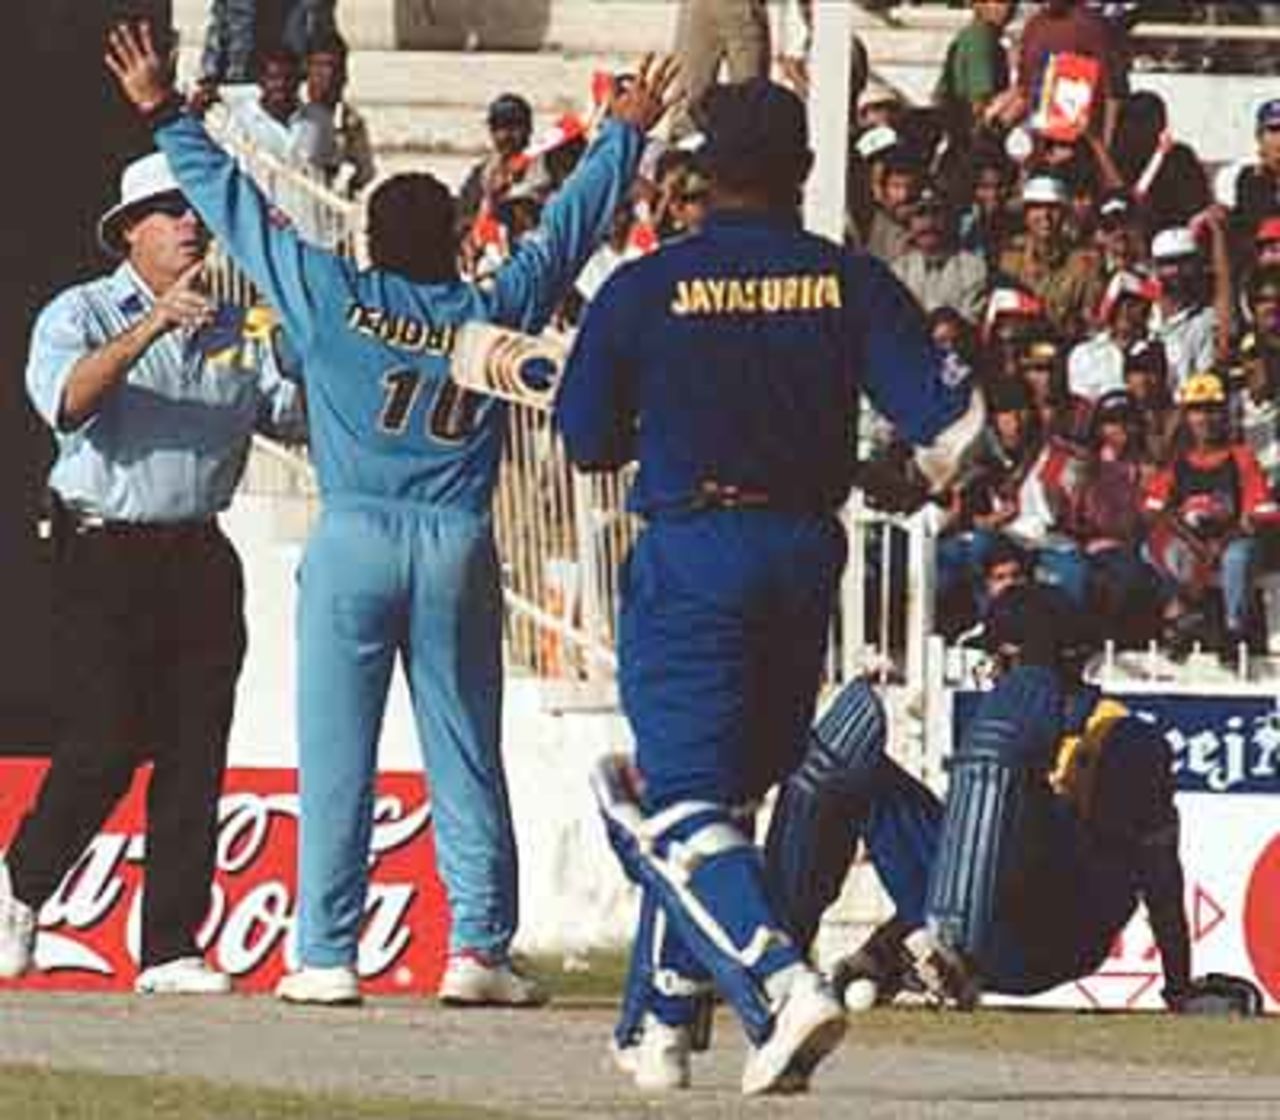 Tendulkar appealing after he fingers the straight drive from Jayasuriya to the wickets as Atapattu is run out, Coca-Cola Champions Trophy, 2000/01, Final, India v Sri Lanka, Sharjah C.A. Stadium, 29 October 2000.